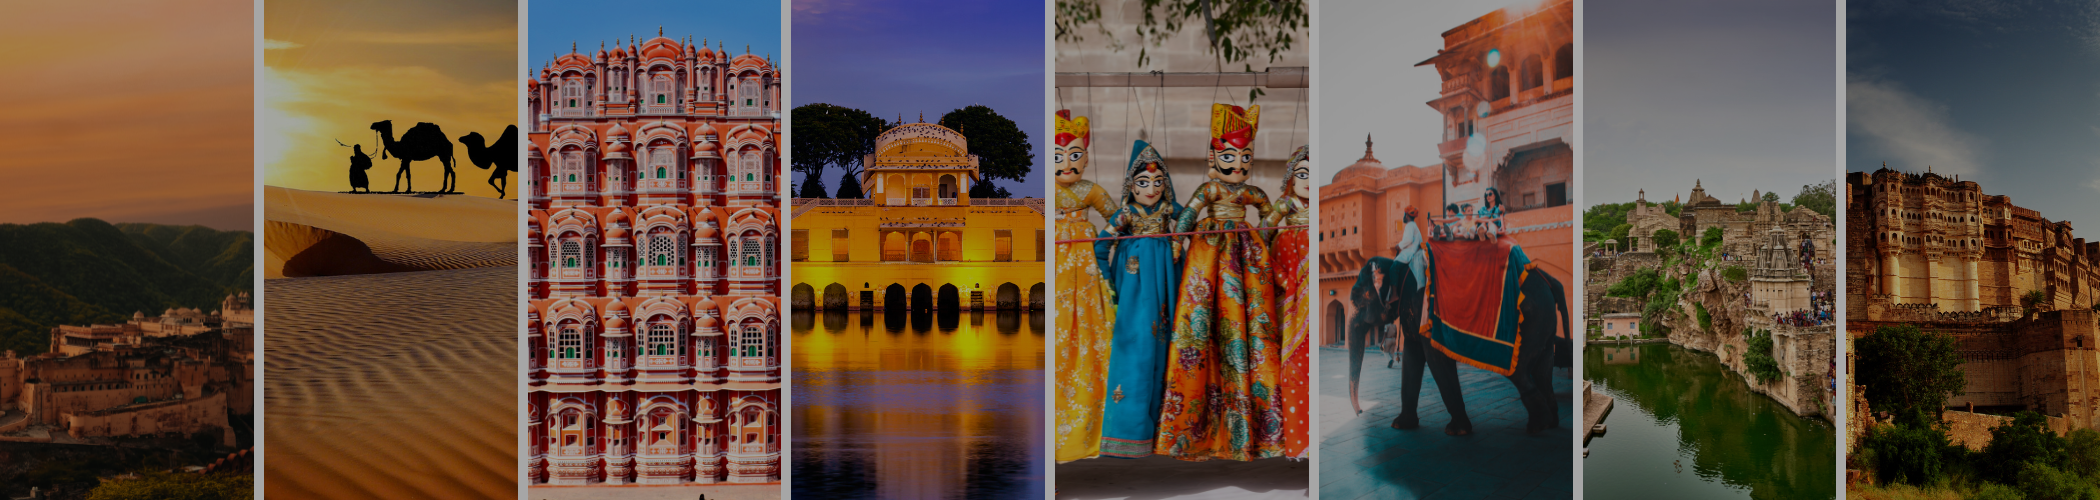 Rajasthan Travel Welcome You Once Again in India